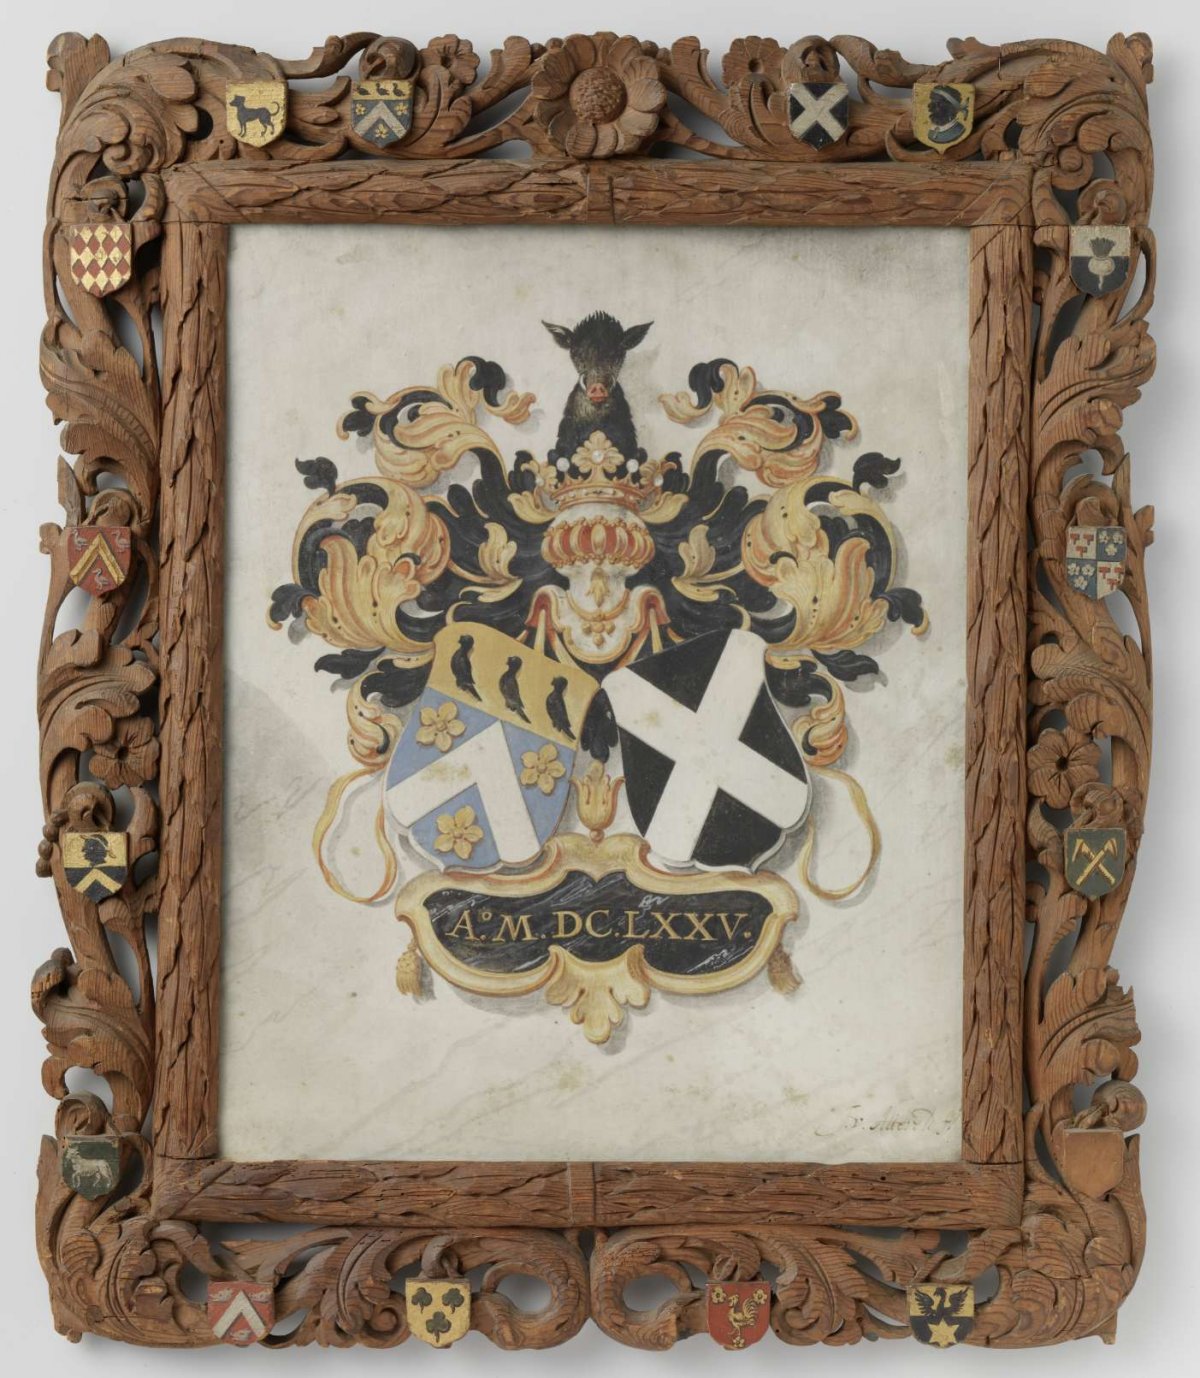 The alliance arms of Jan Boudaen Courten and Anna Maria Hoeufft, great-grandparents of Jacob Verheye van Citters, in a carved wooden frame with the arms of the couple's sixteen quarters, Justus van Attevelt, 1675